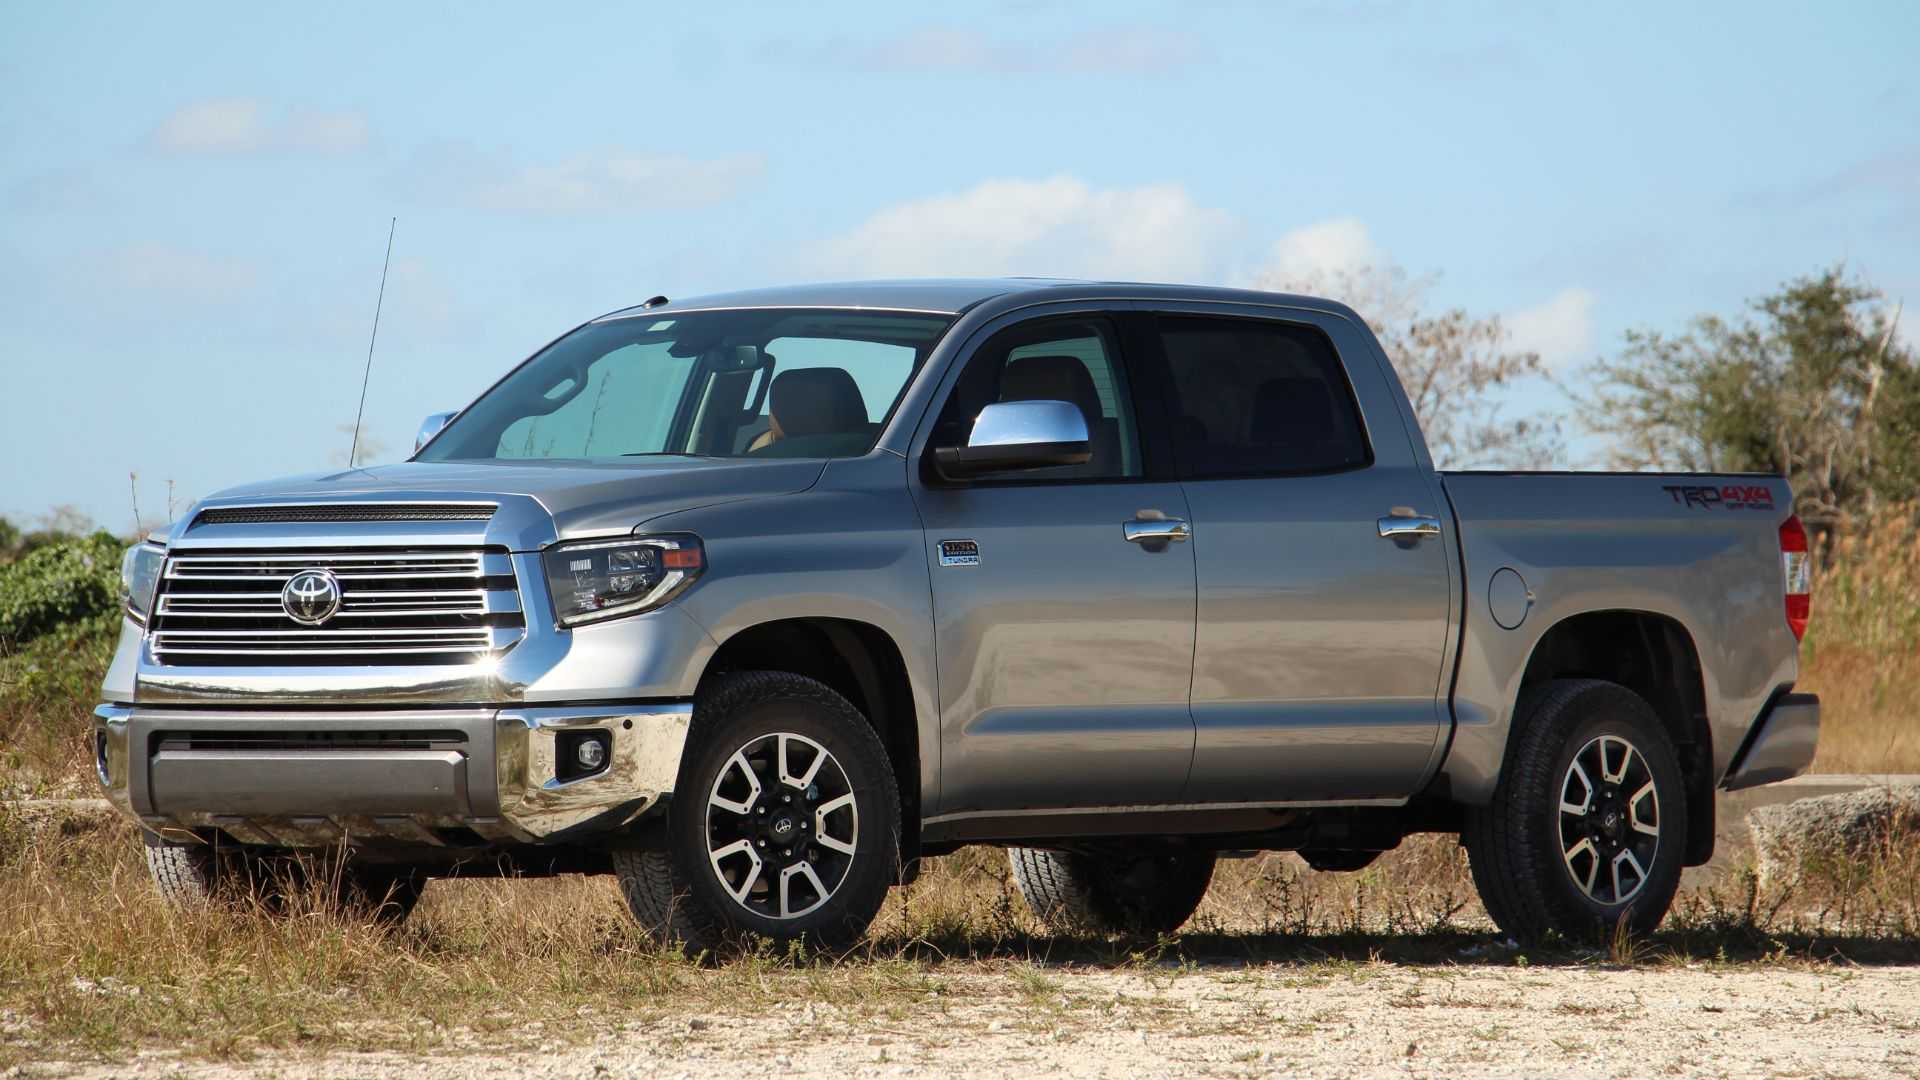 Features That Make The Toyota Tundra 1794 Edition Unique